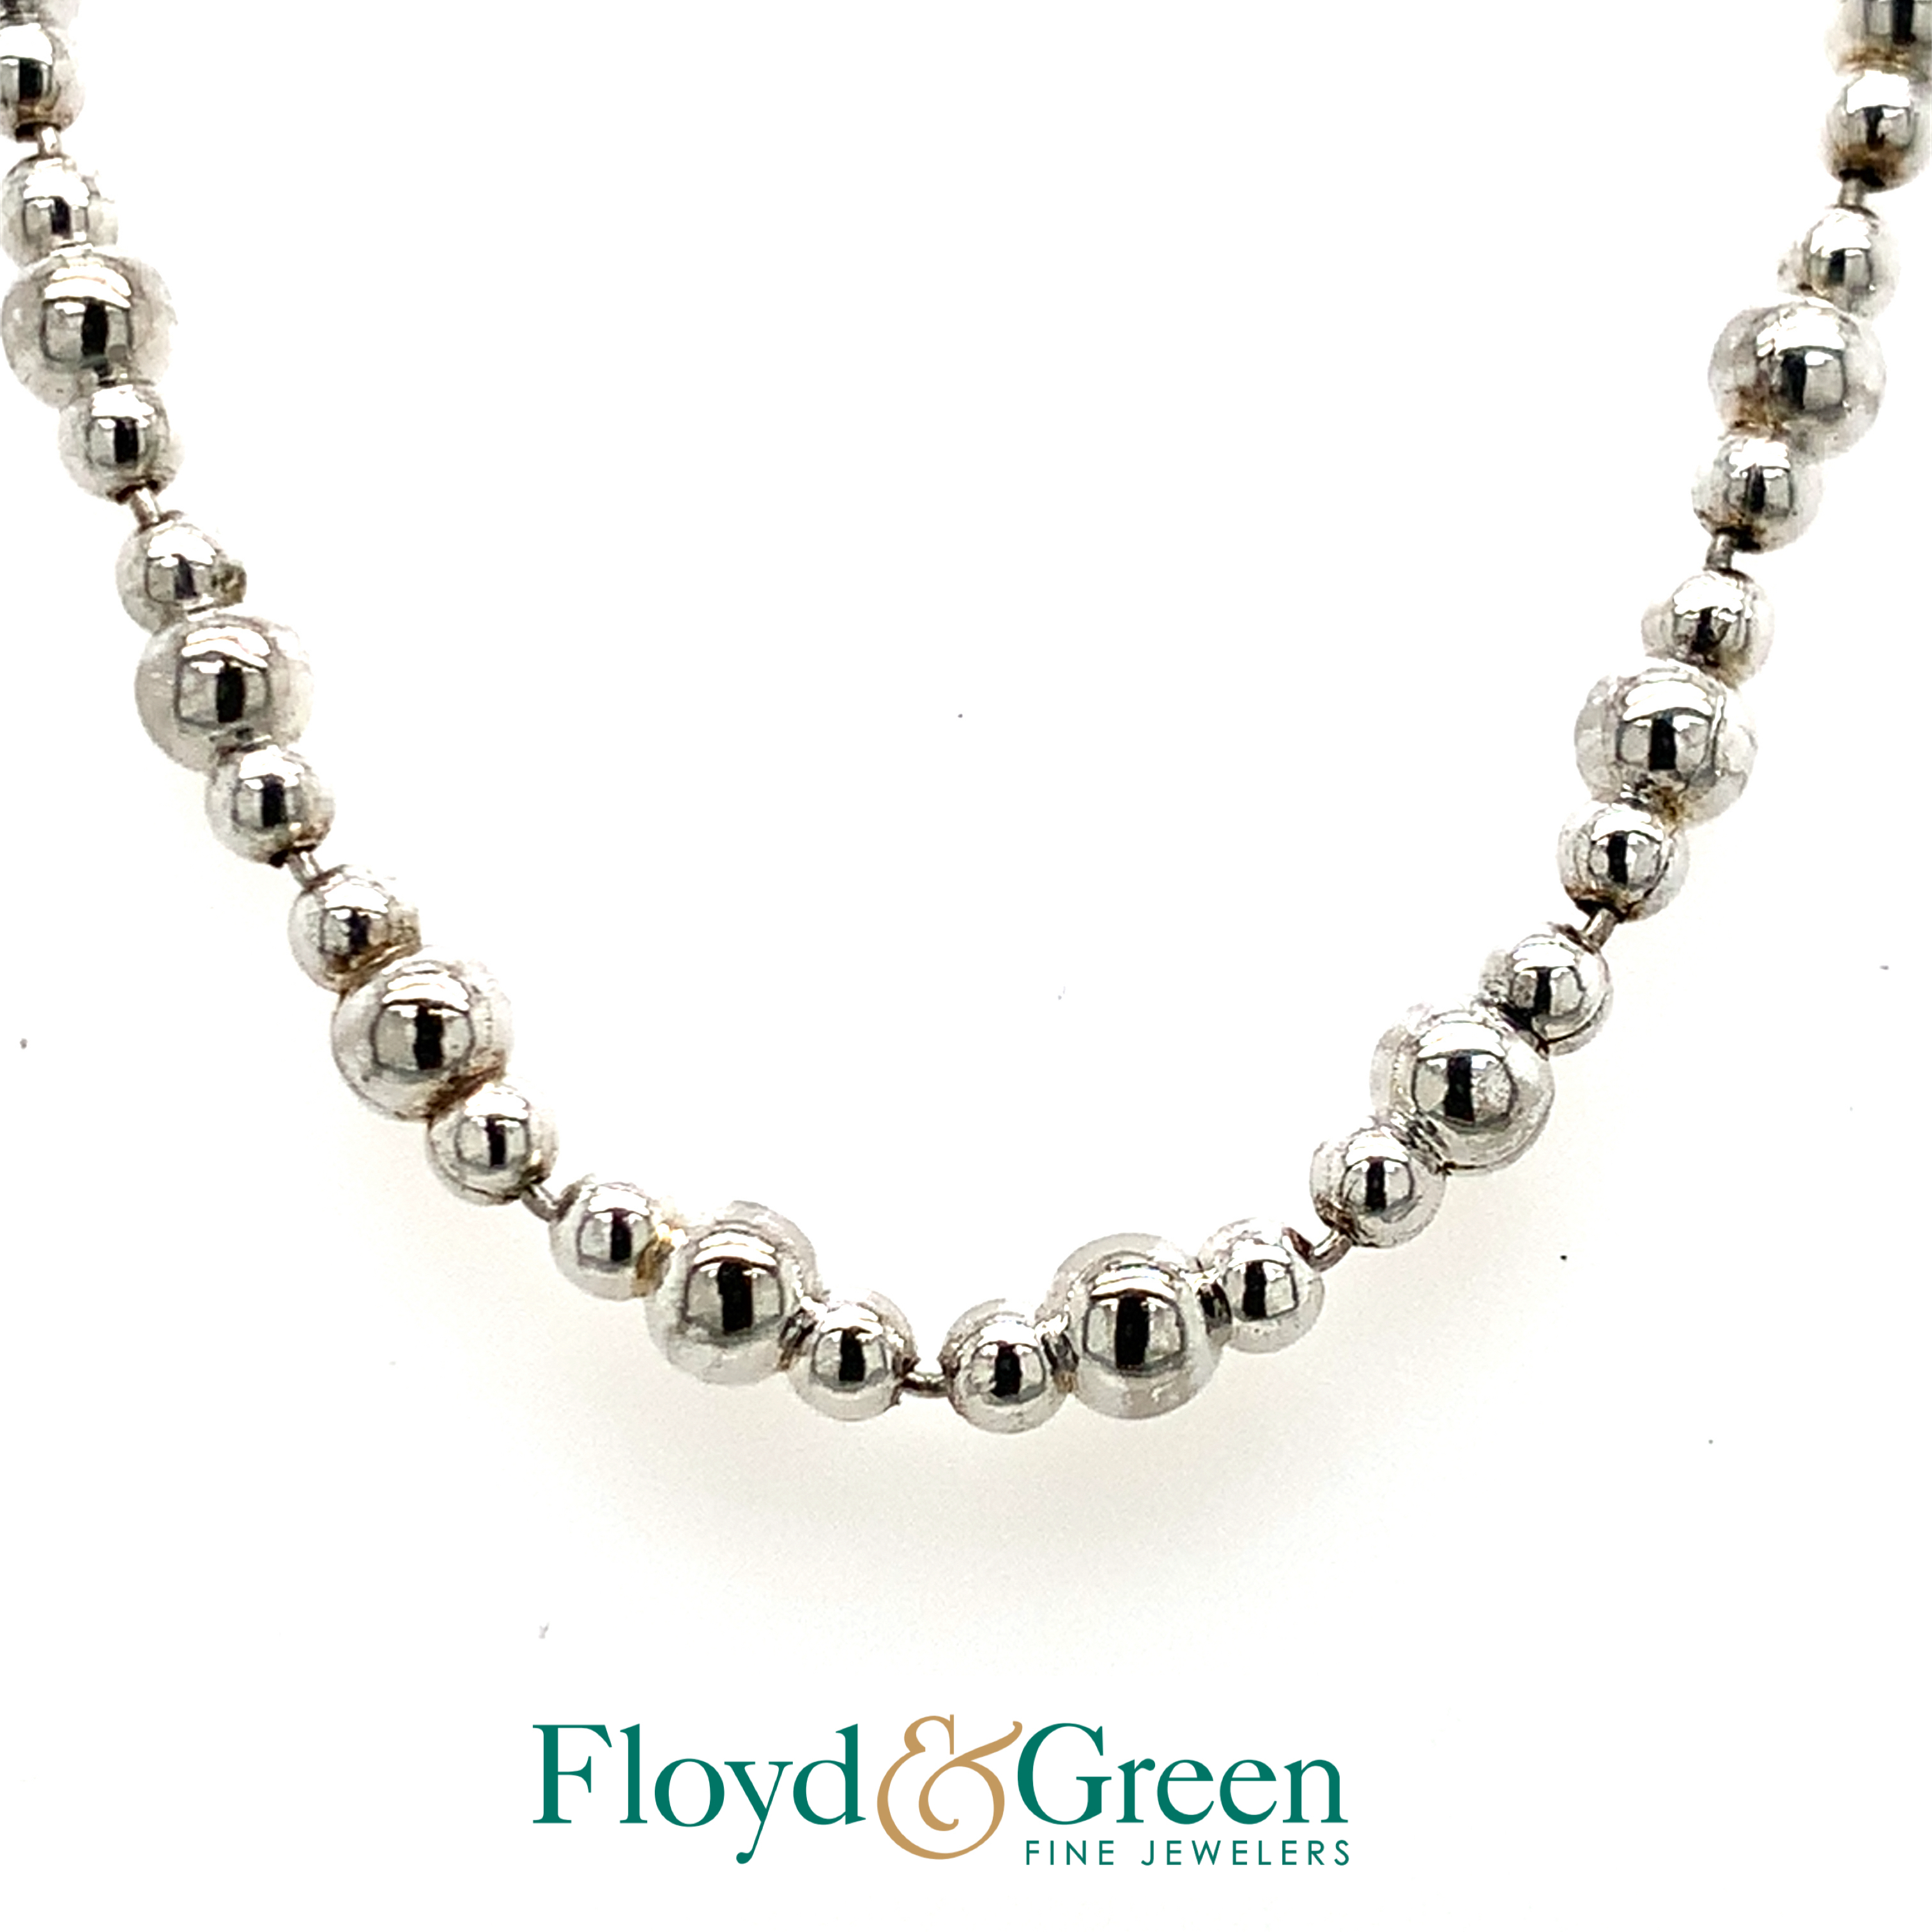 Silver Bead Necklace